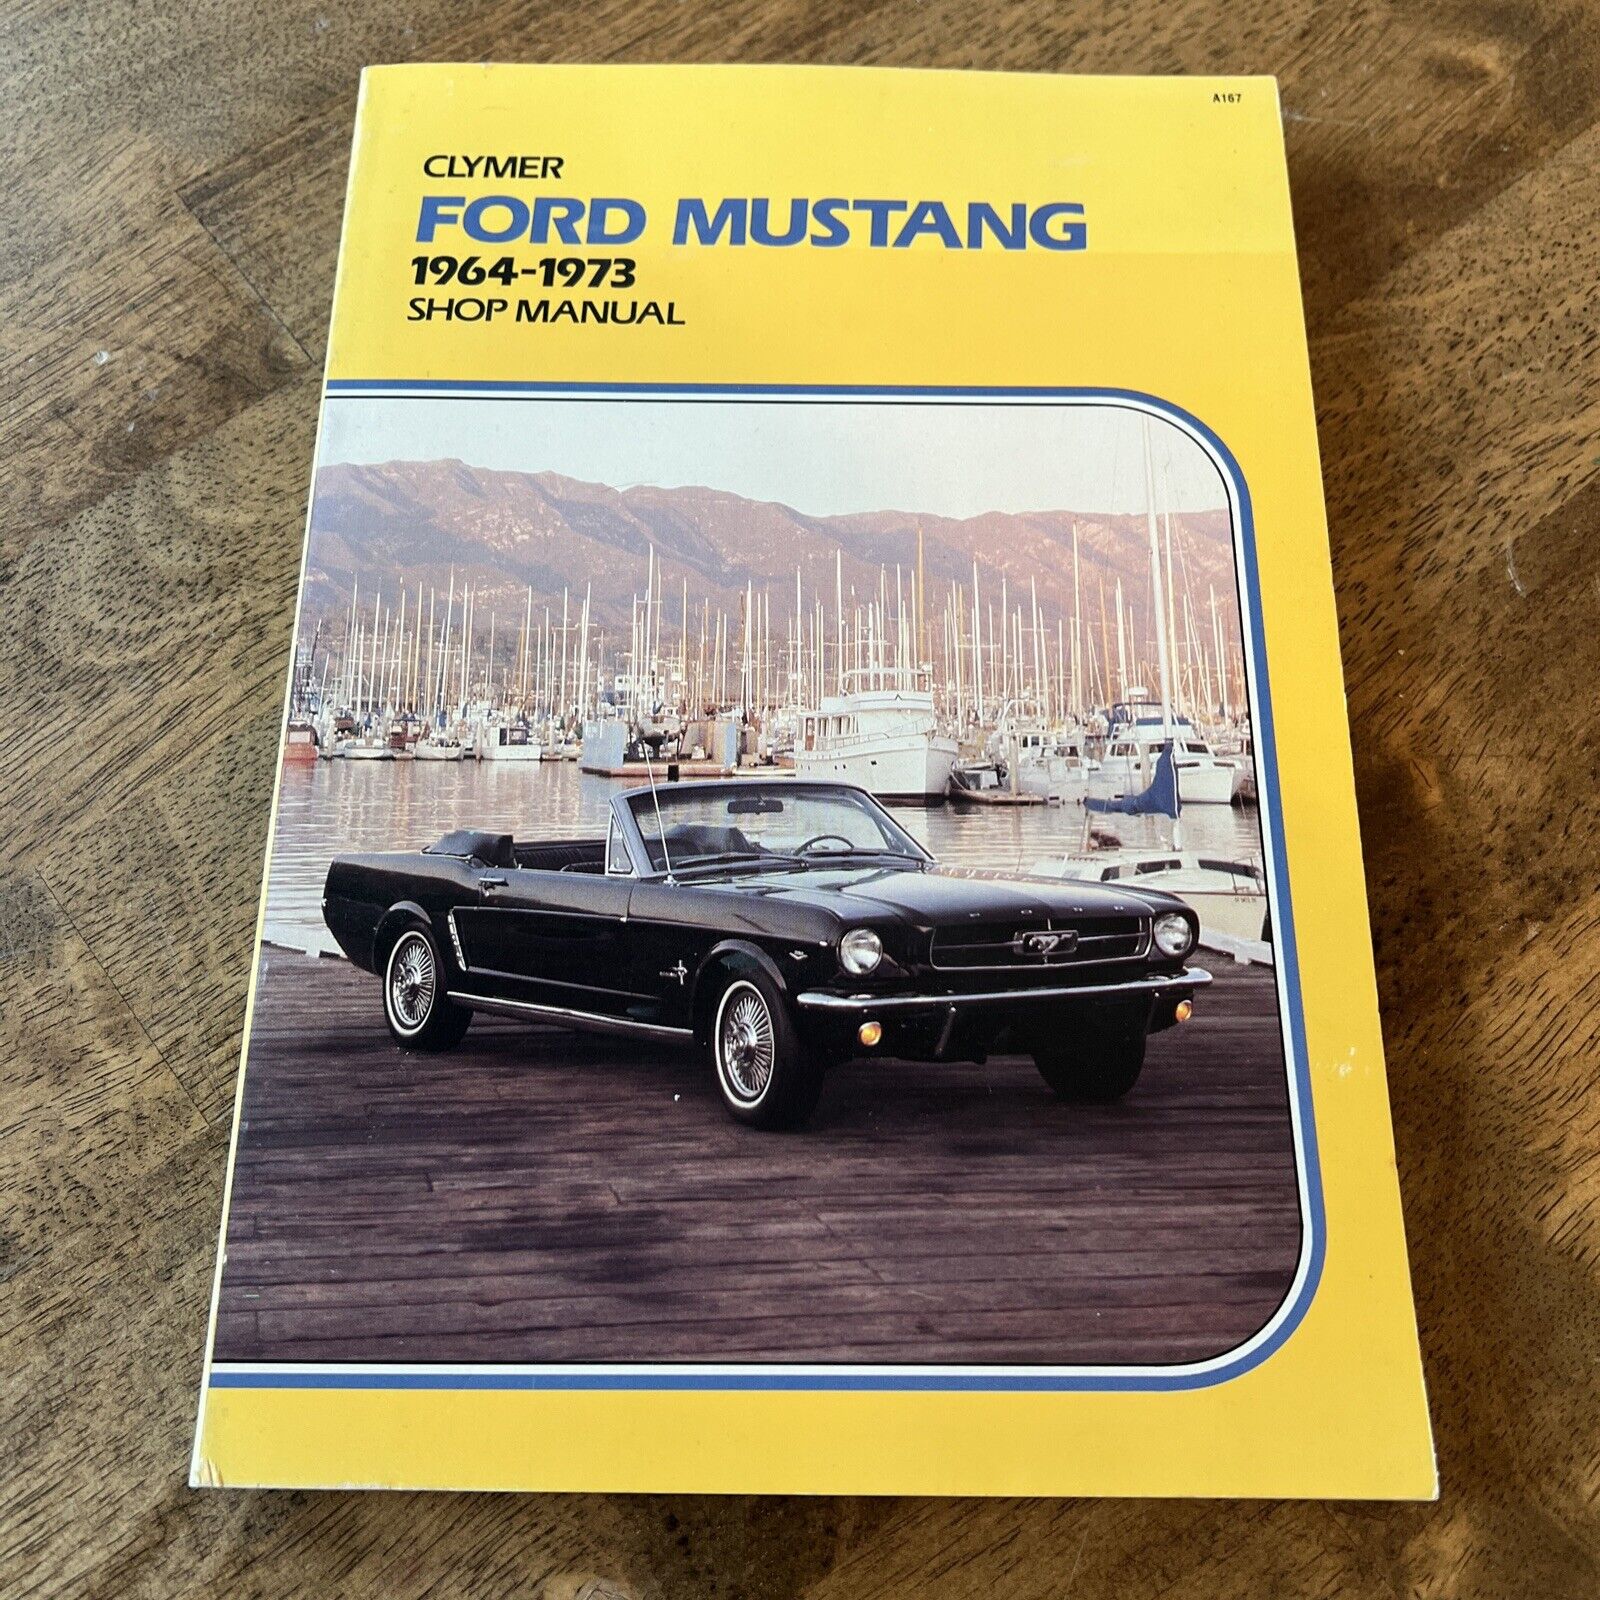 Clymer A167 Ford Mustang 1964-1973 Shop Manual - NEW MINT UNUSED